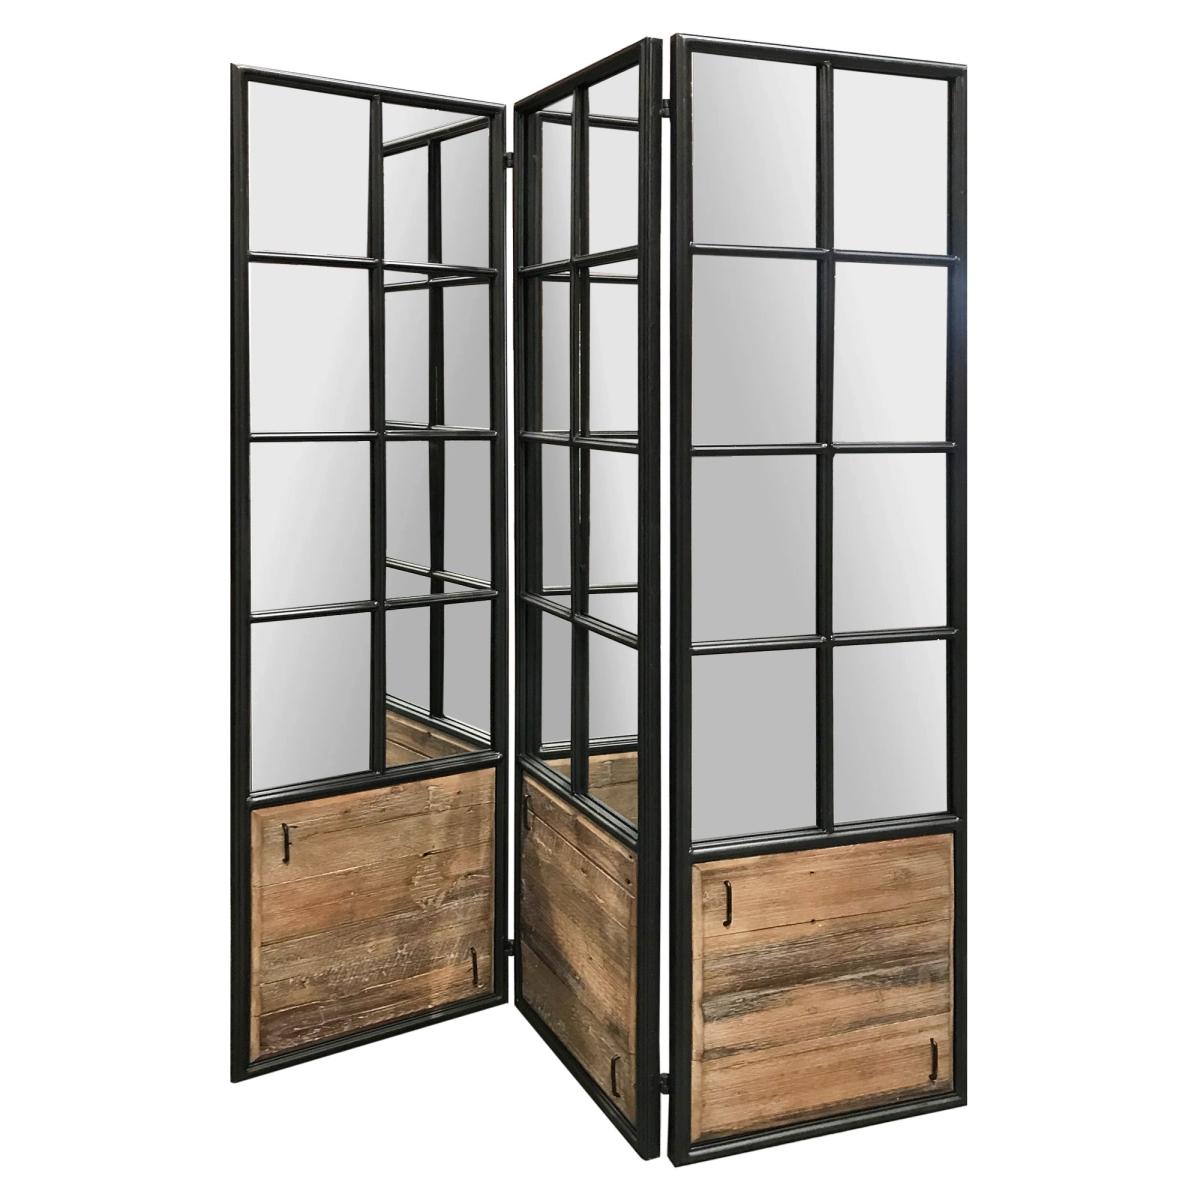 379905 3 Panel Black & Brown Room Divider With An Optical Illusion